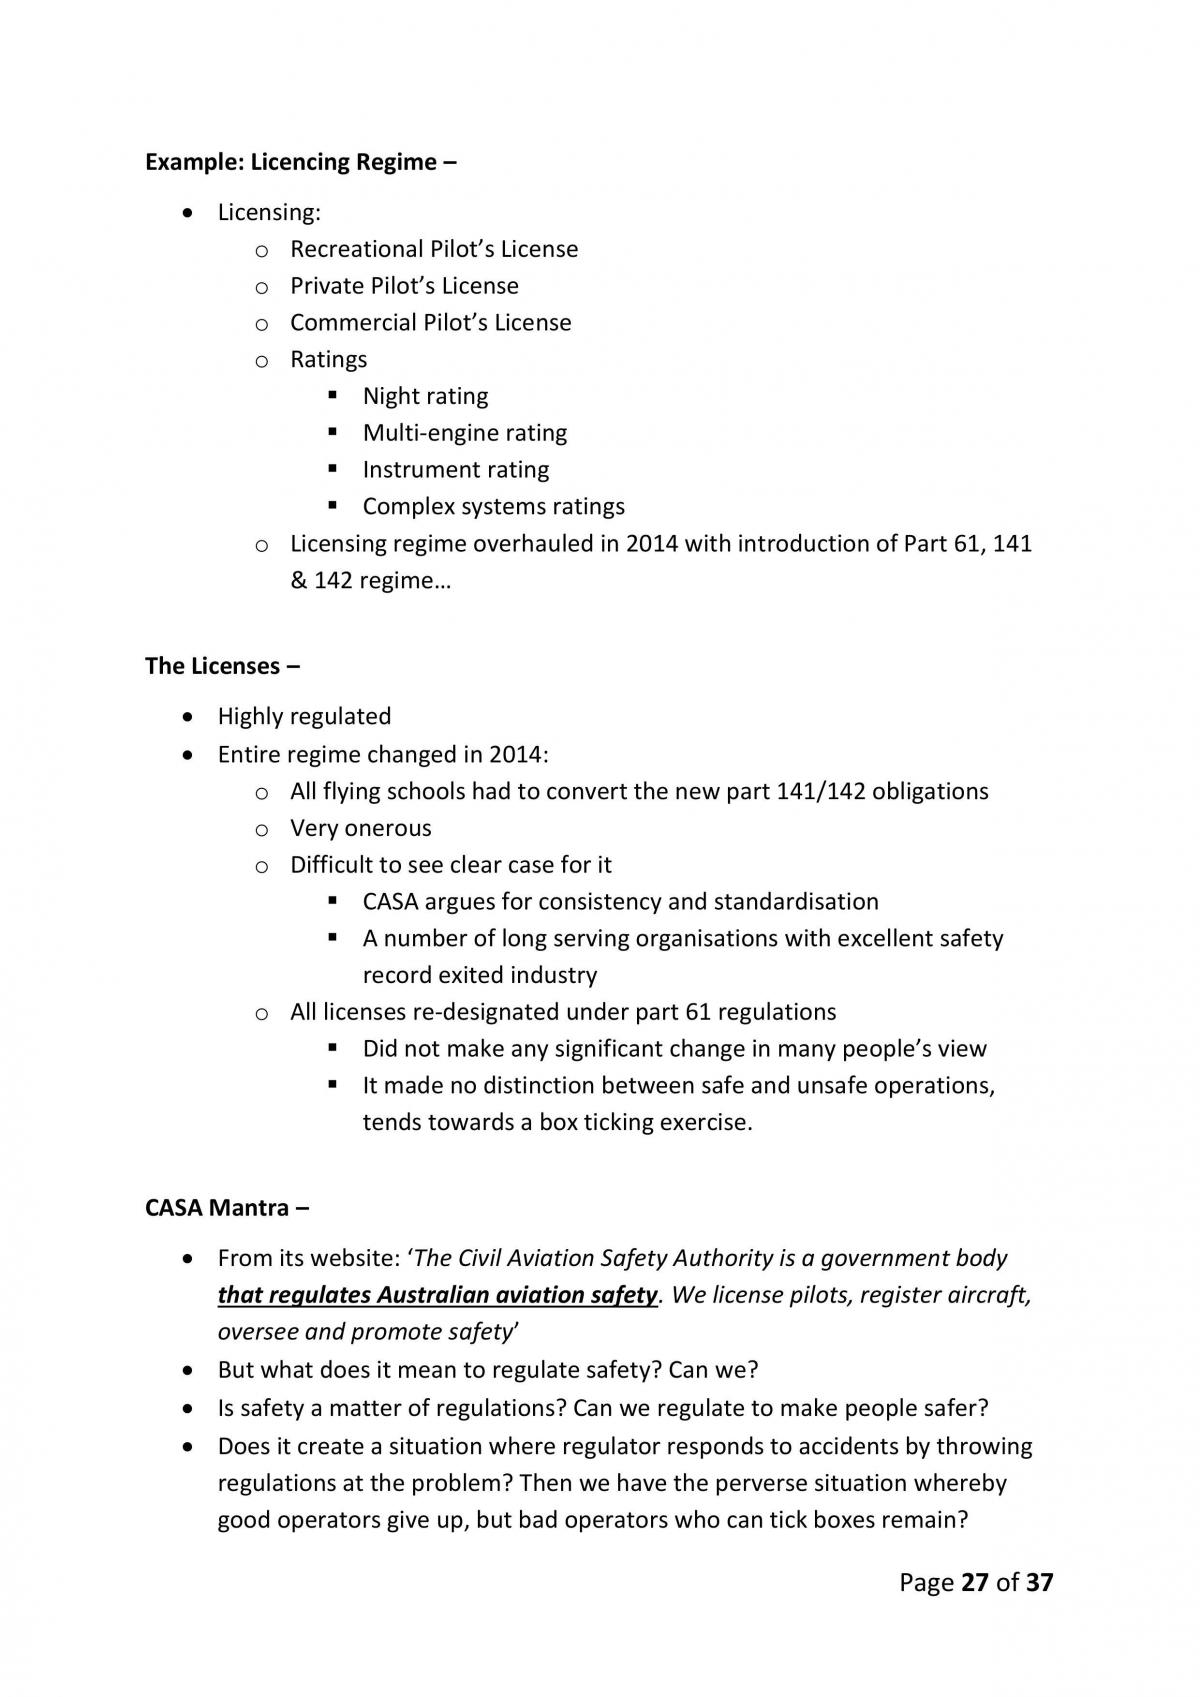 All-in-one LLB142 Lectures 1-3 Study Notes - Page 27